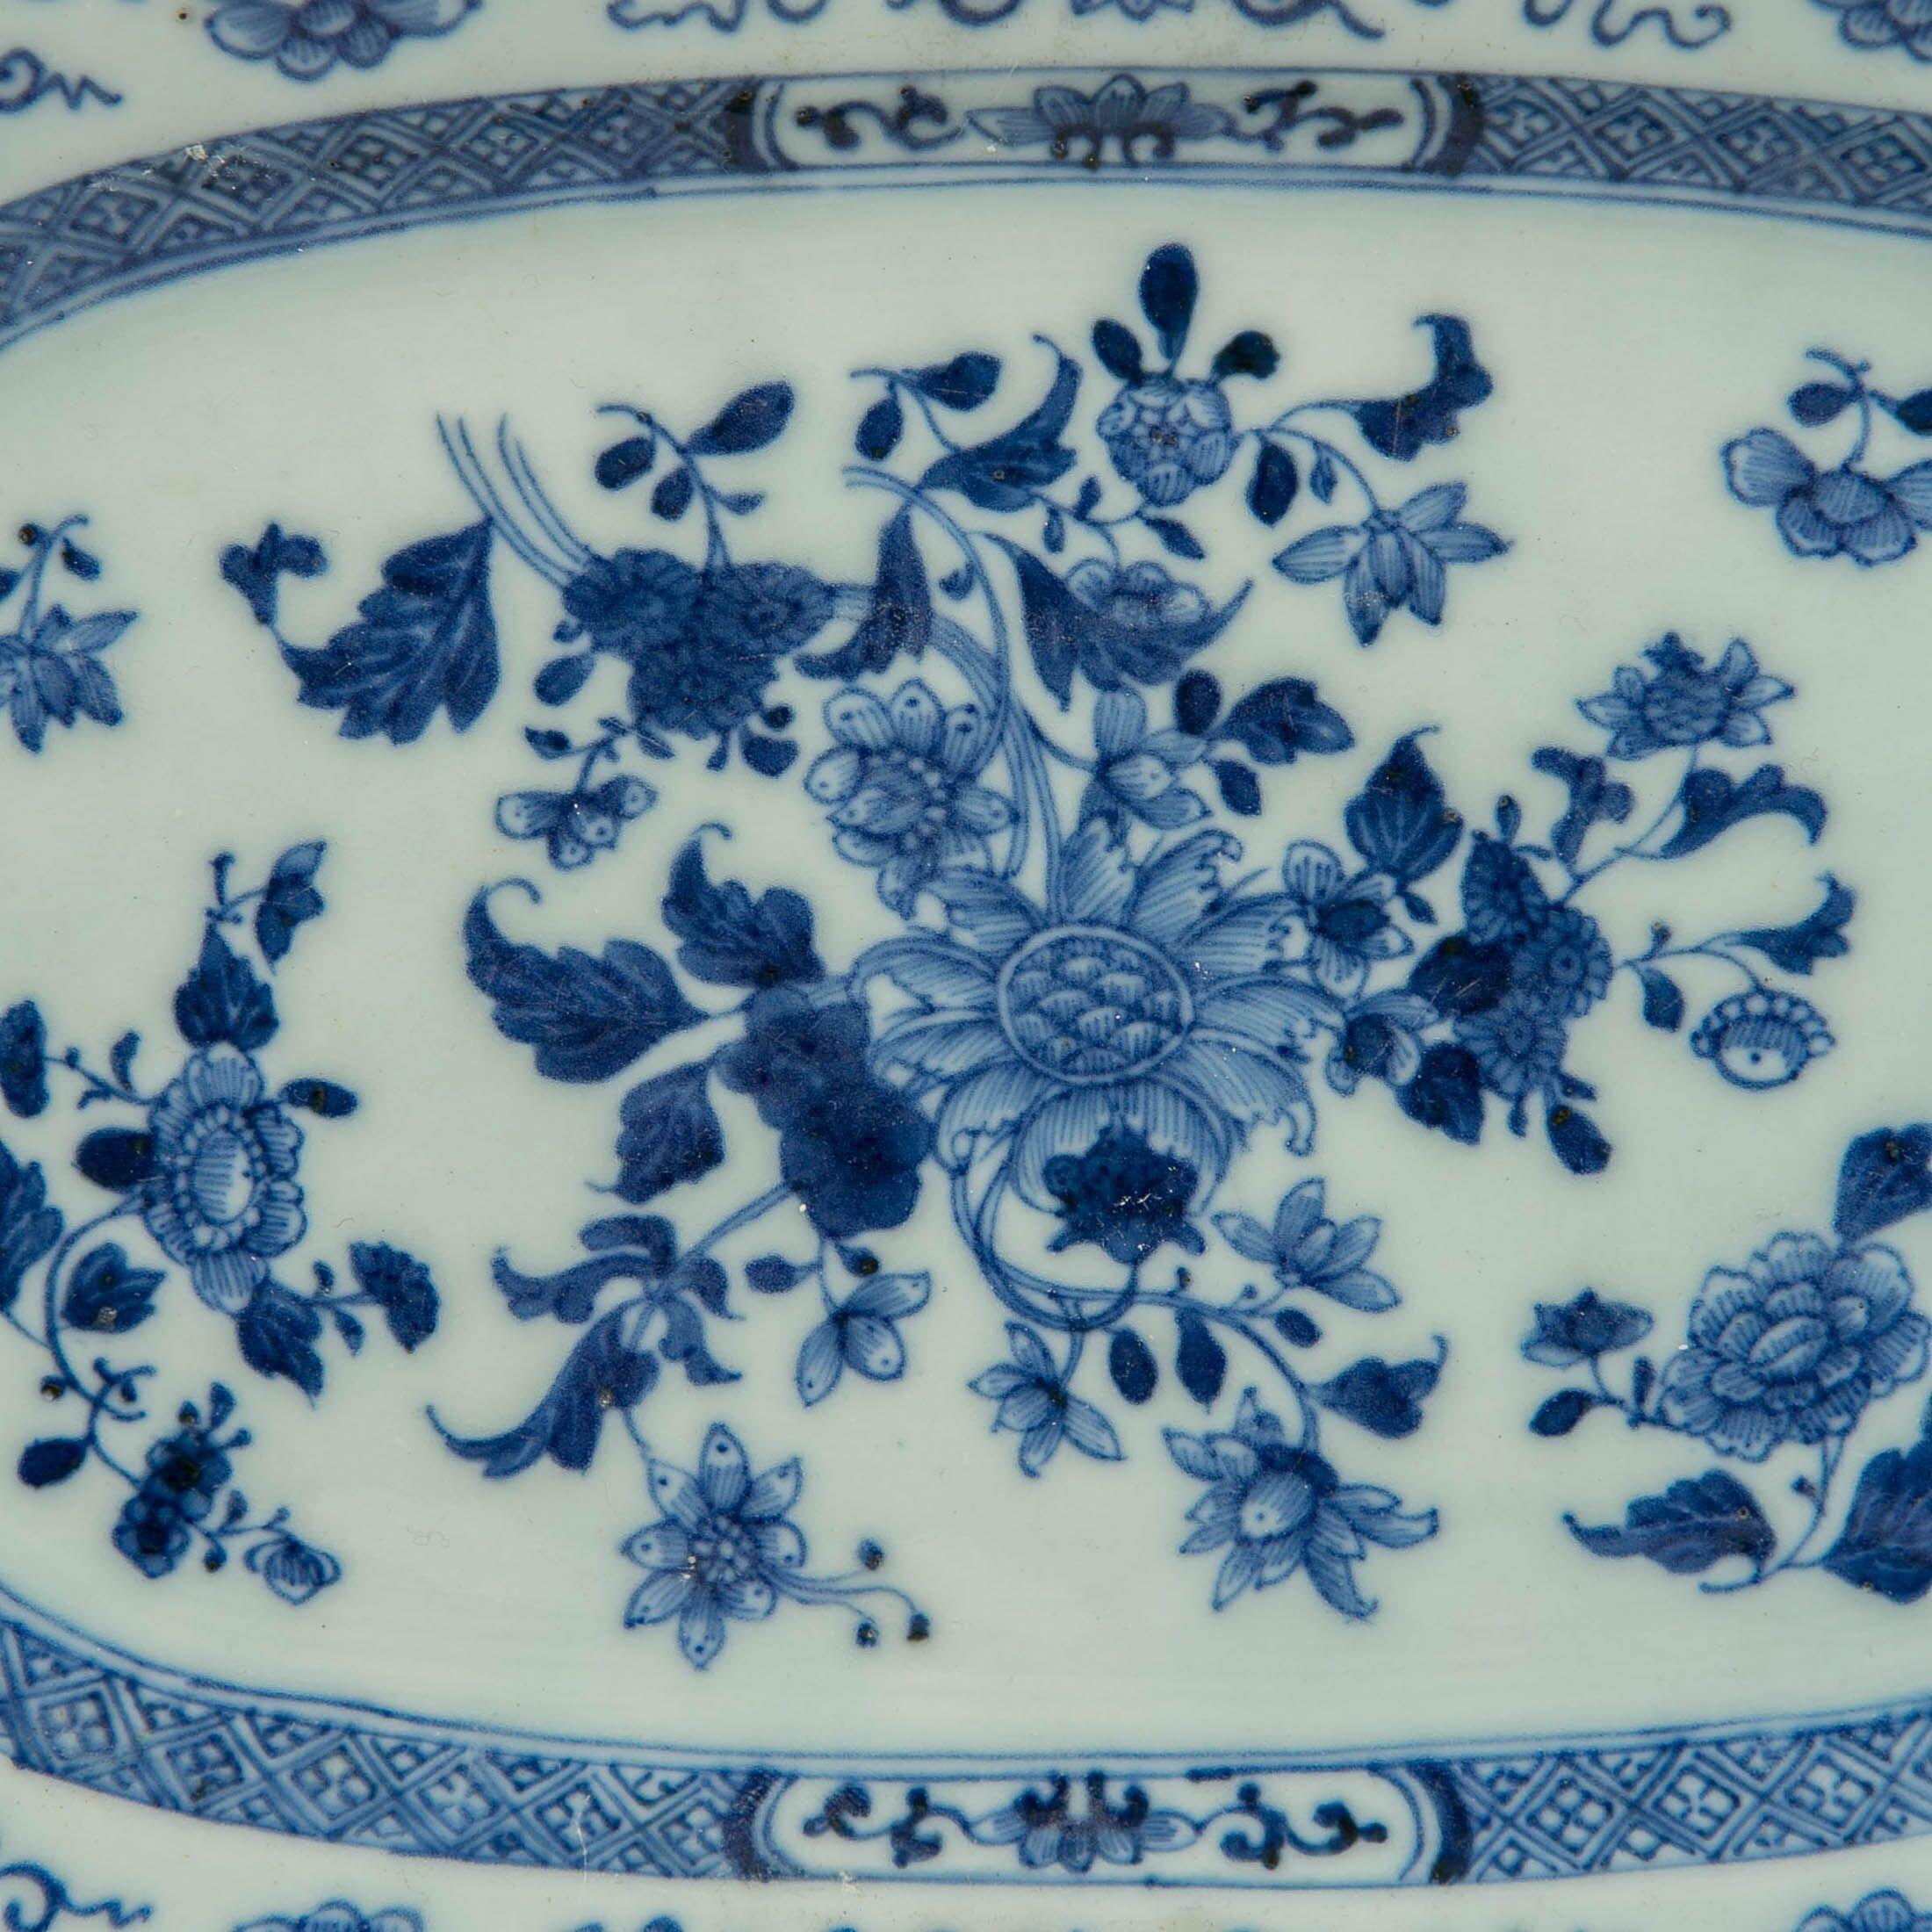 A Chinese blue and white platter hand-painted in beautiful underglaze cobalt blue during the Qianlong period, circa 1770. The center is filled with a bouquet of flowers and loose sprigs of flowers. Some of the flowers are painted in medium blue and